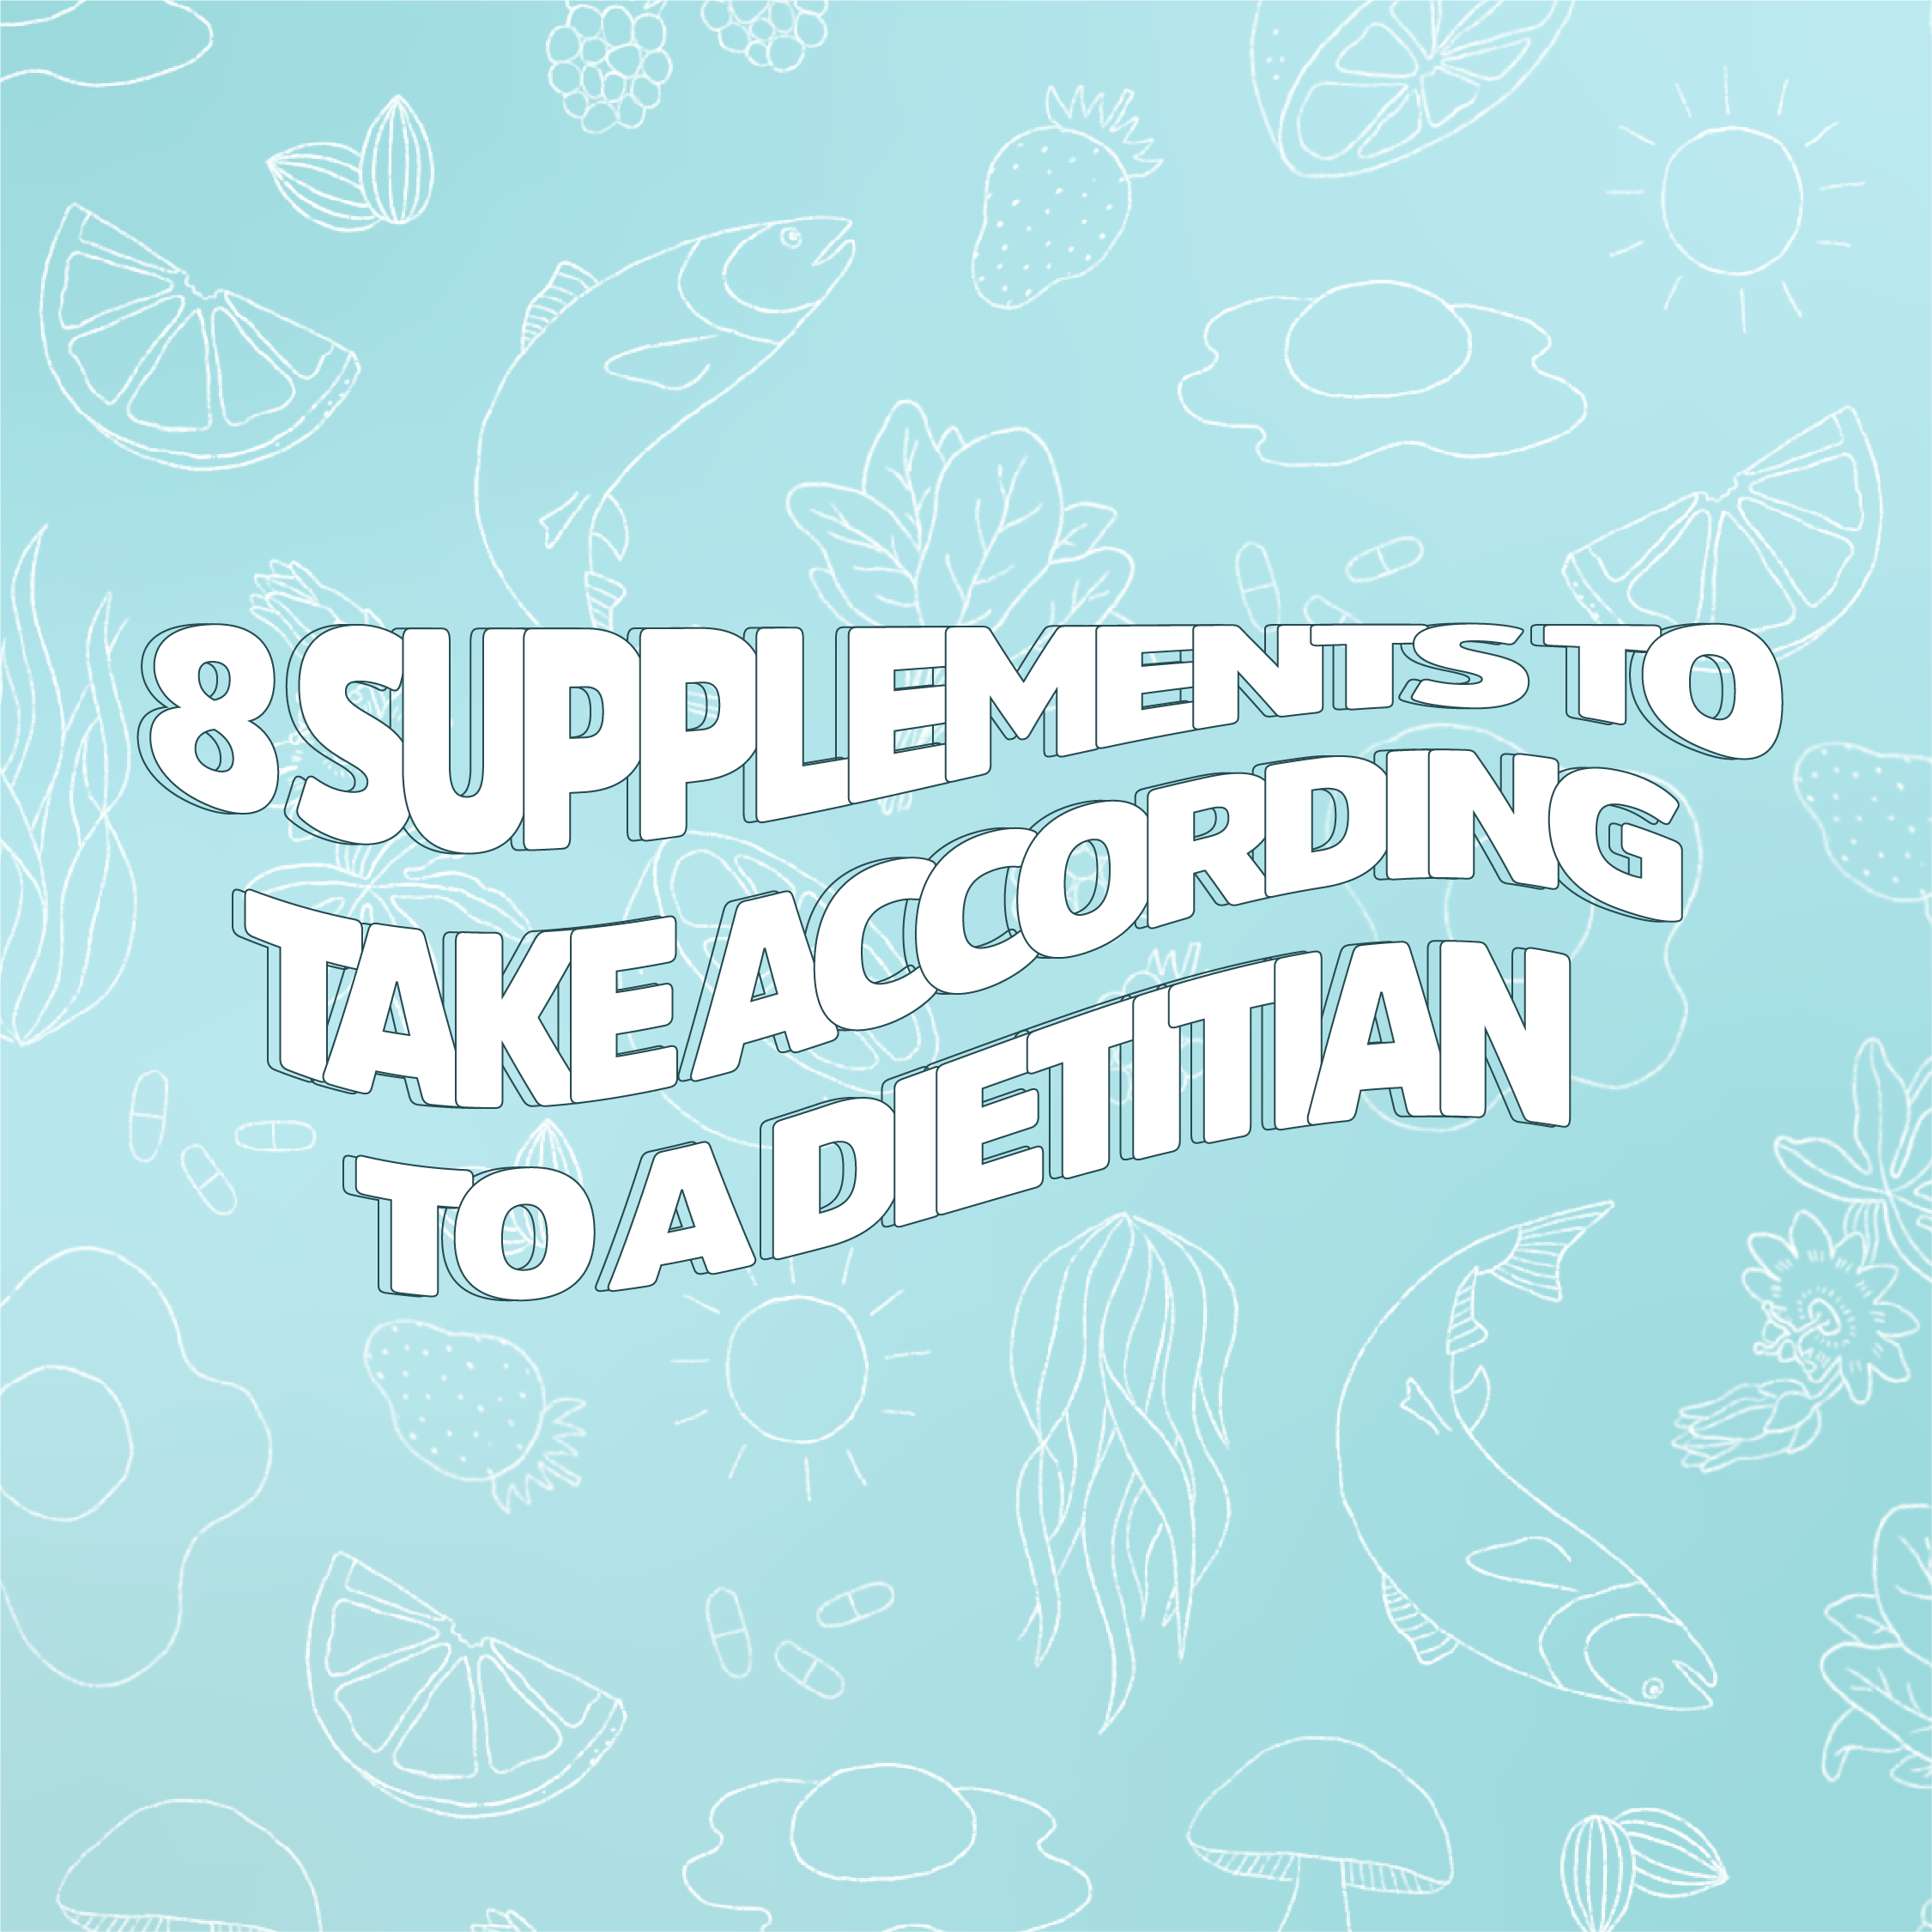 8 supplements to take, according to a dietician